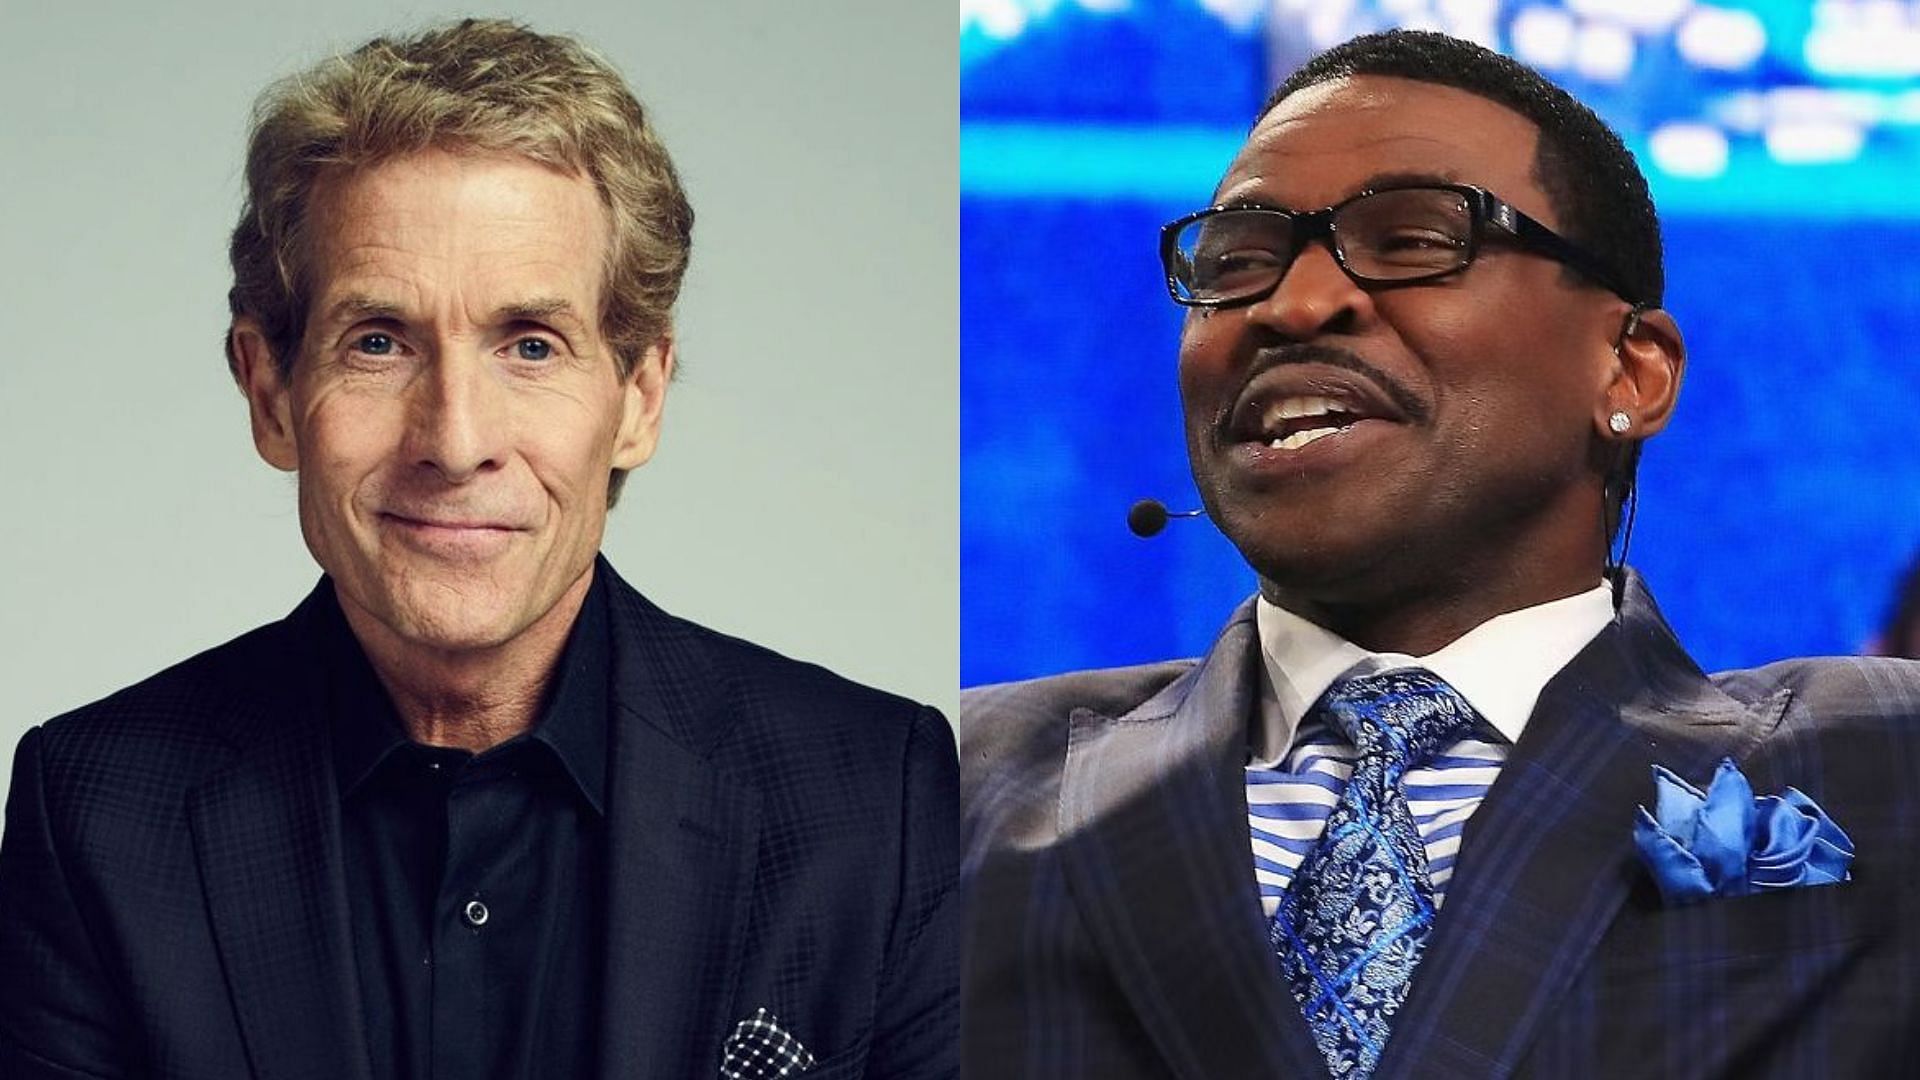 Skip Bayless has announced that Michael Irvin will join FS1